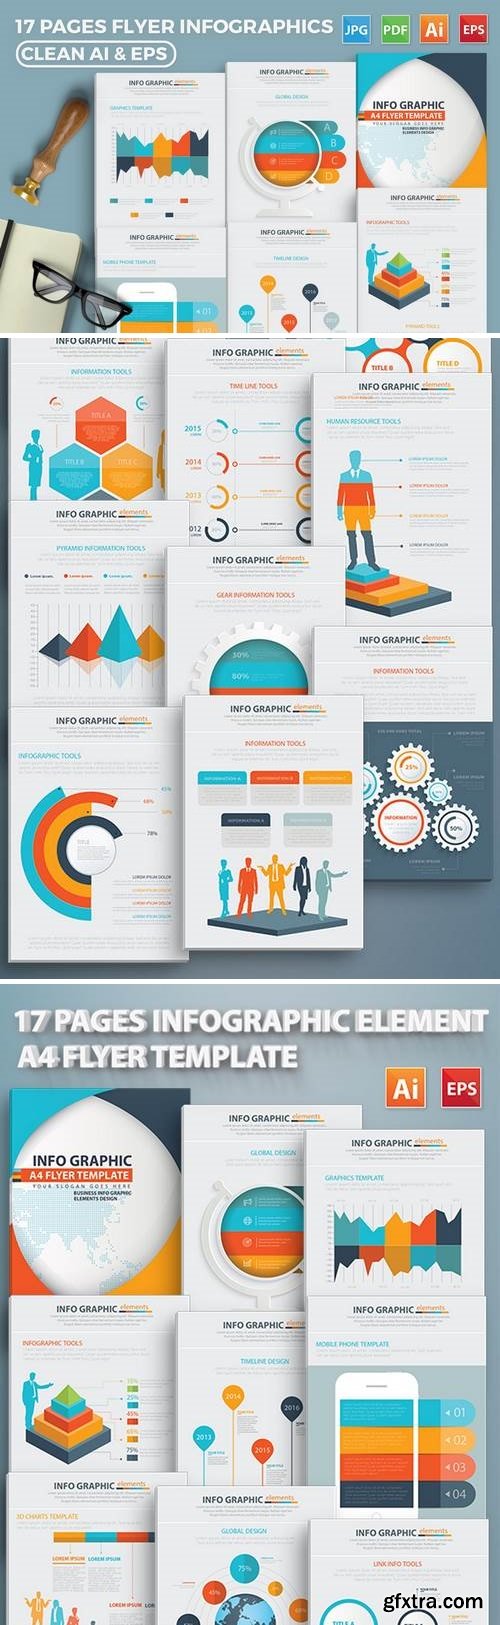 Infographic 17 Pages